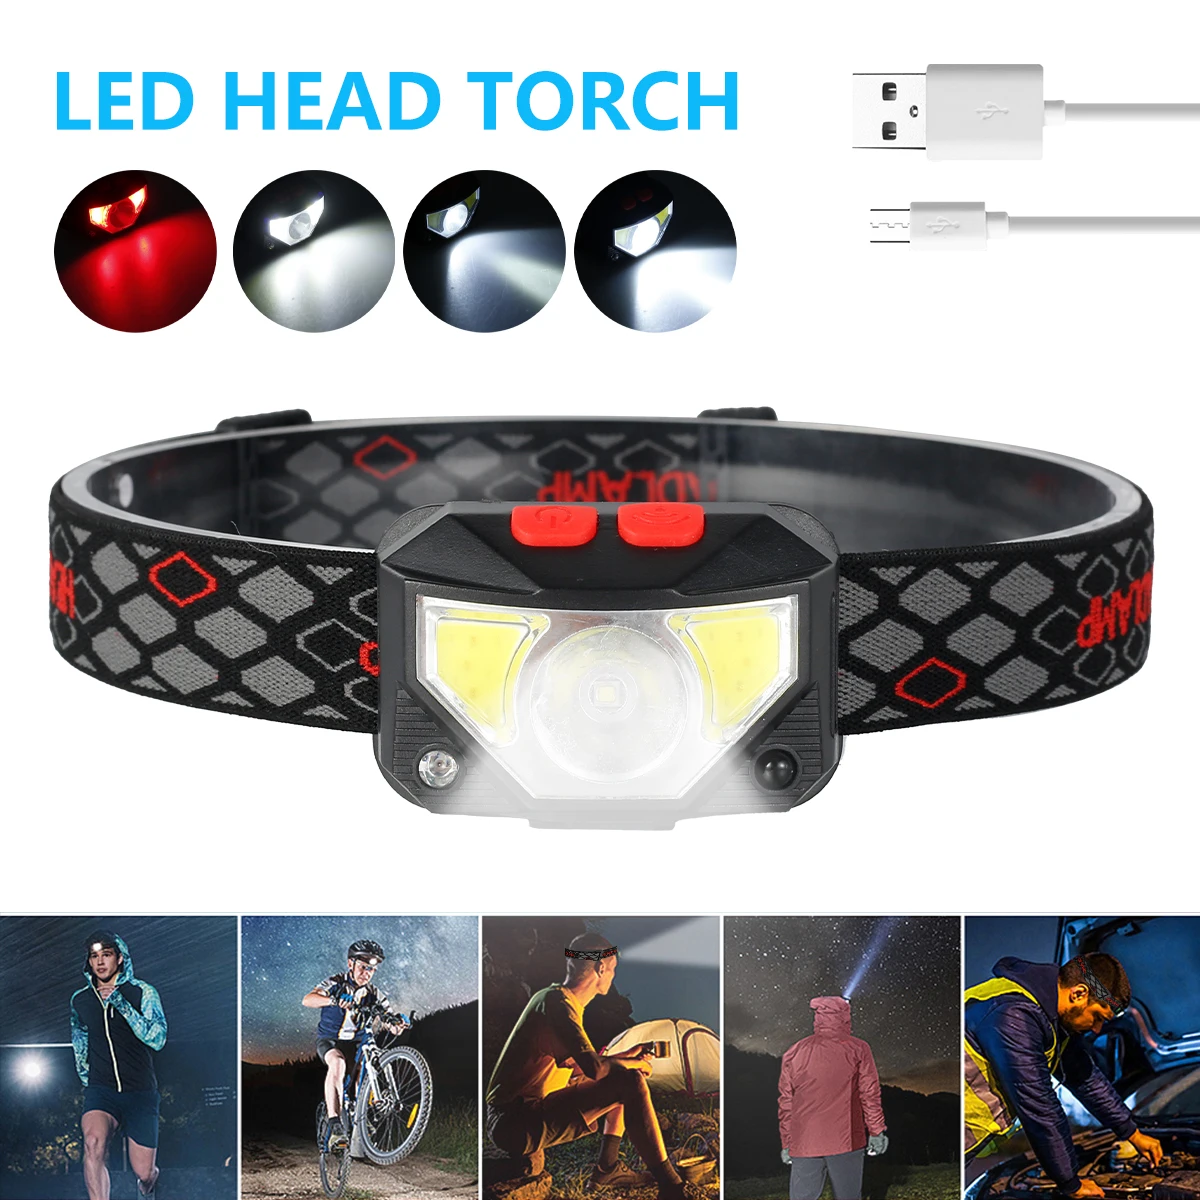 

USB Rechargeable Headlamp COB LED IPX5 Waterproof Torch Light 6 Lighting Modes Motion Sensor Flashlight for Bicycling Running